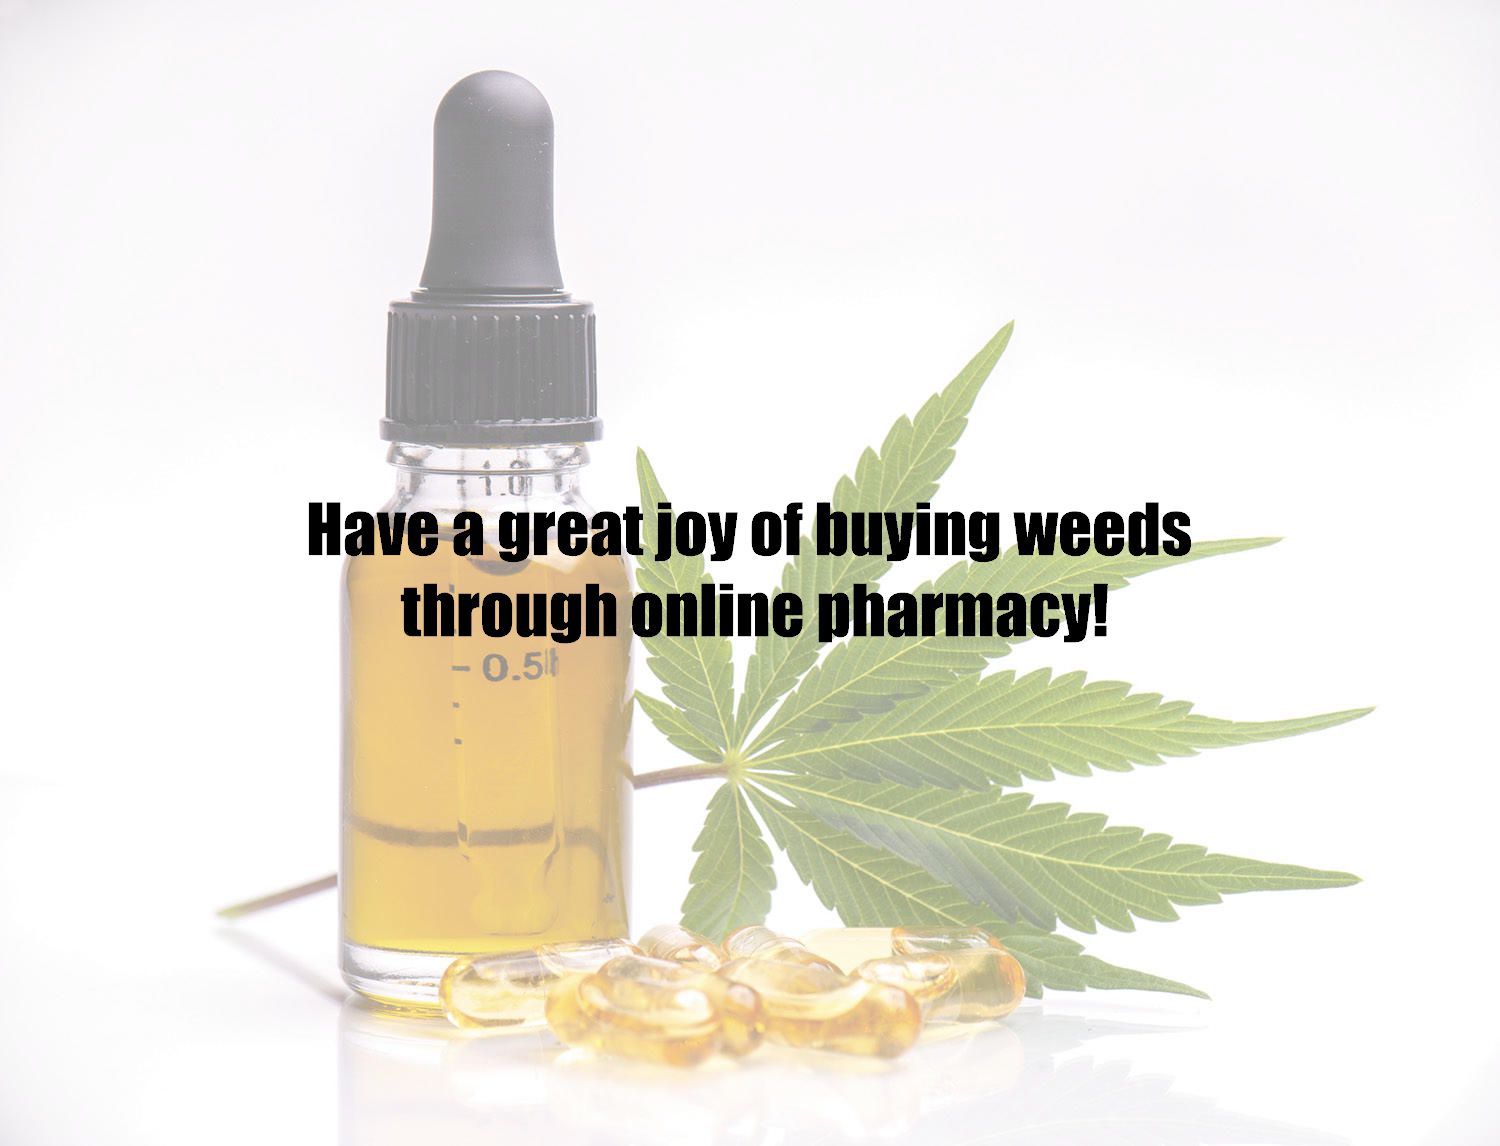 Have a great joy of buying weeds through online pharmacy!